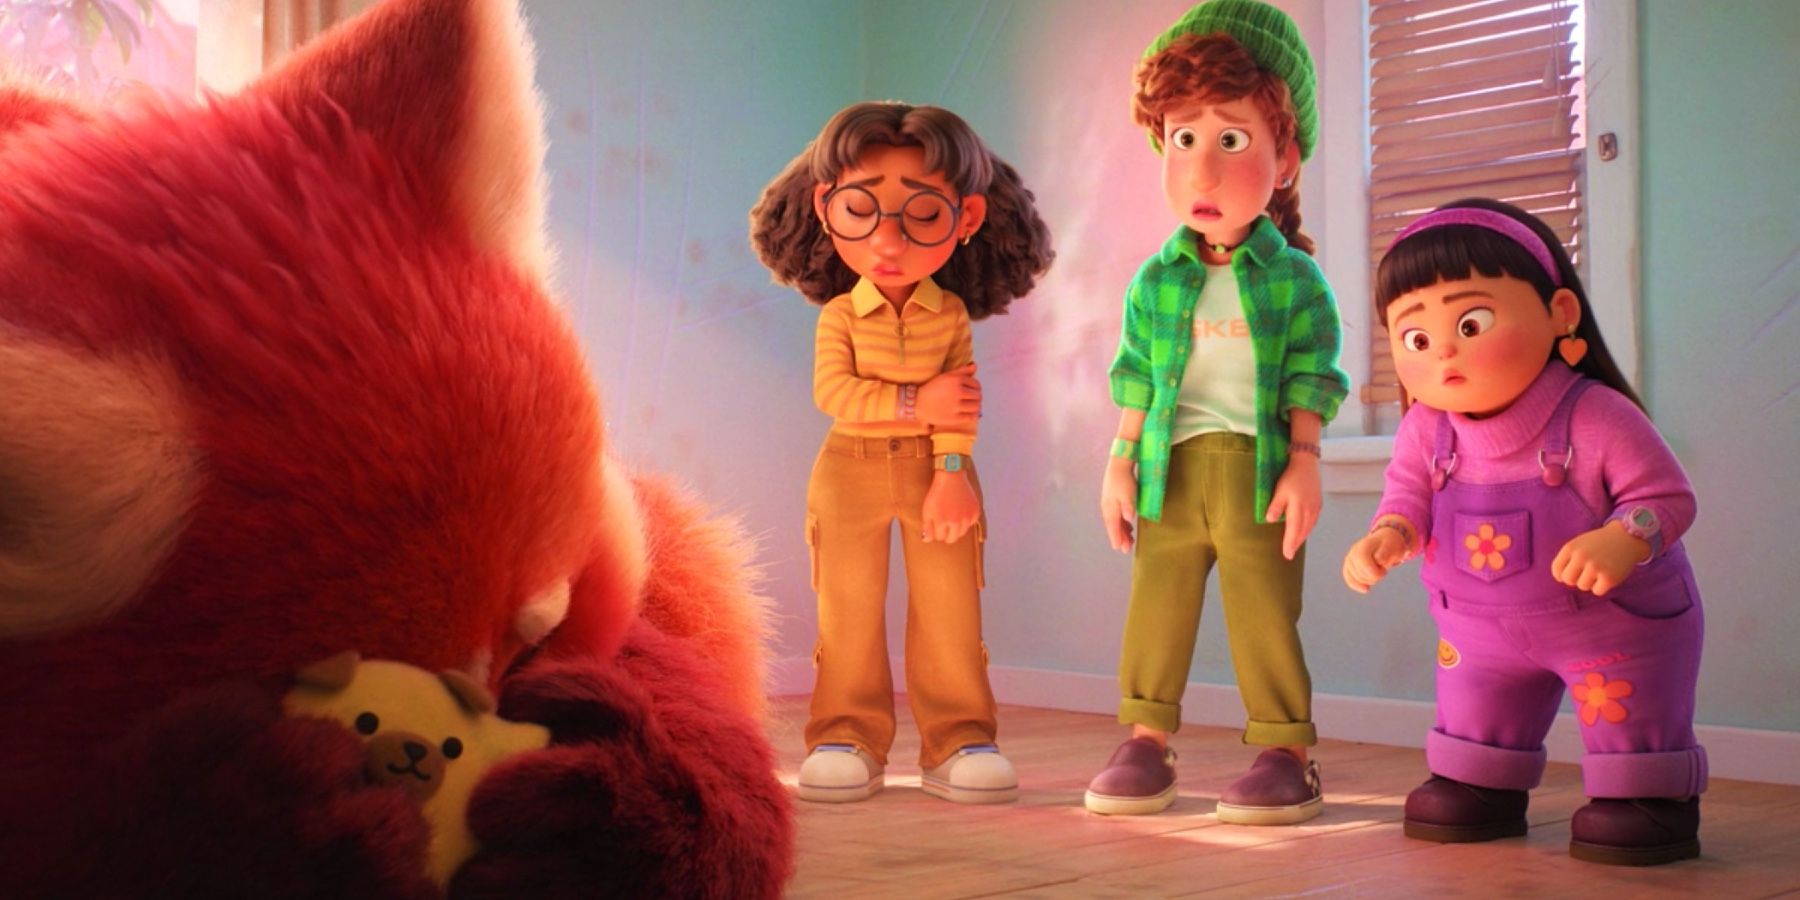 Is Priya queer in Turning Red? Pixar cinematographer appears to confirm  theories - PopBuzz